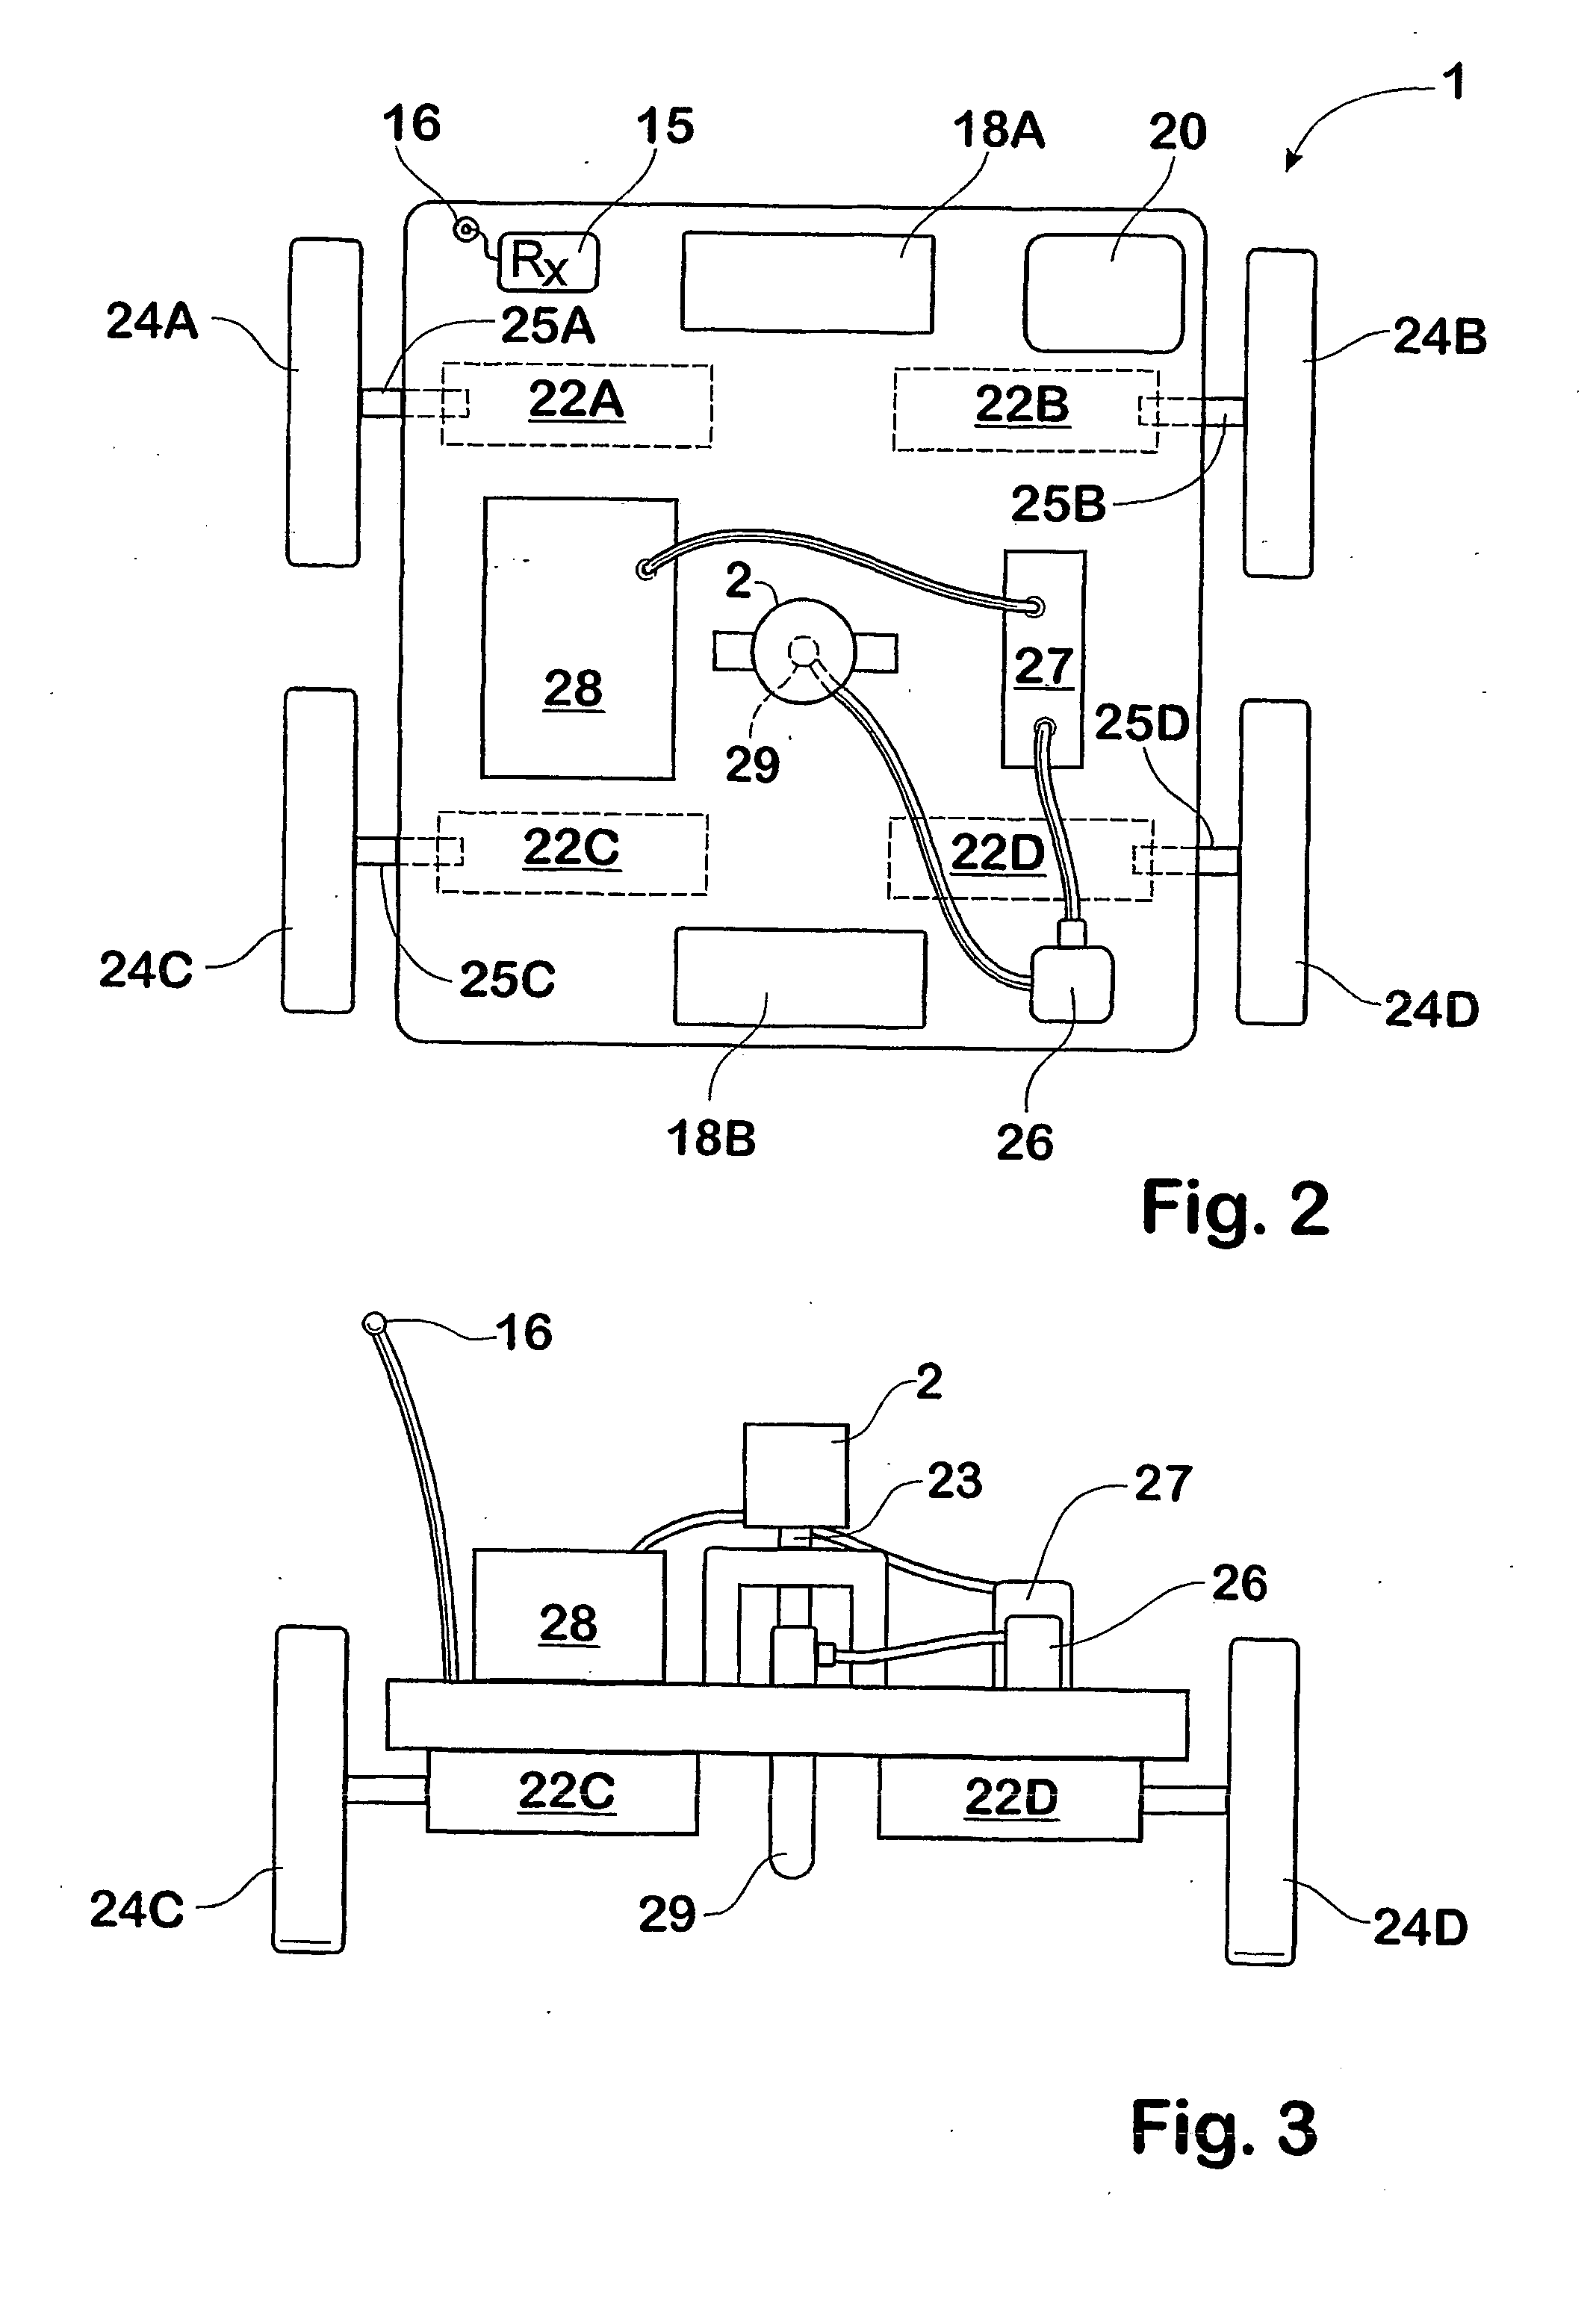 Automatic ground marking method and apparatus